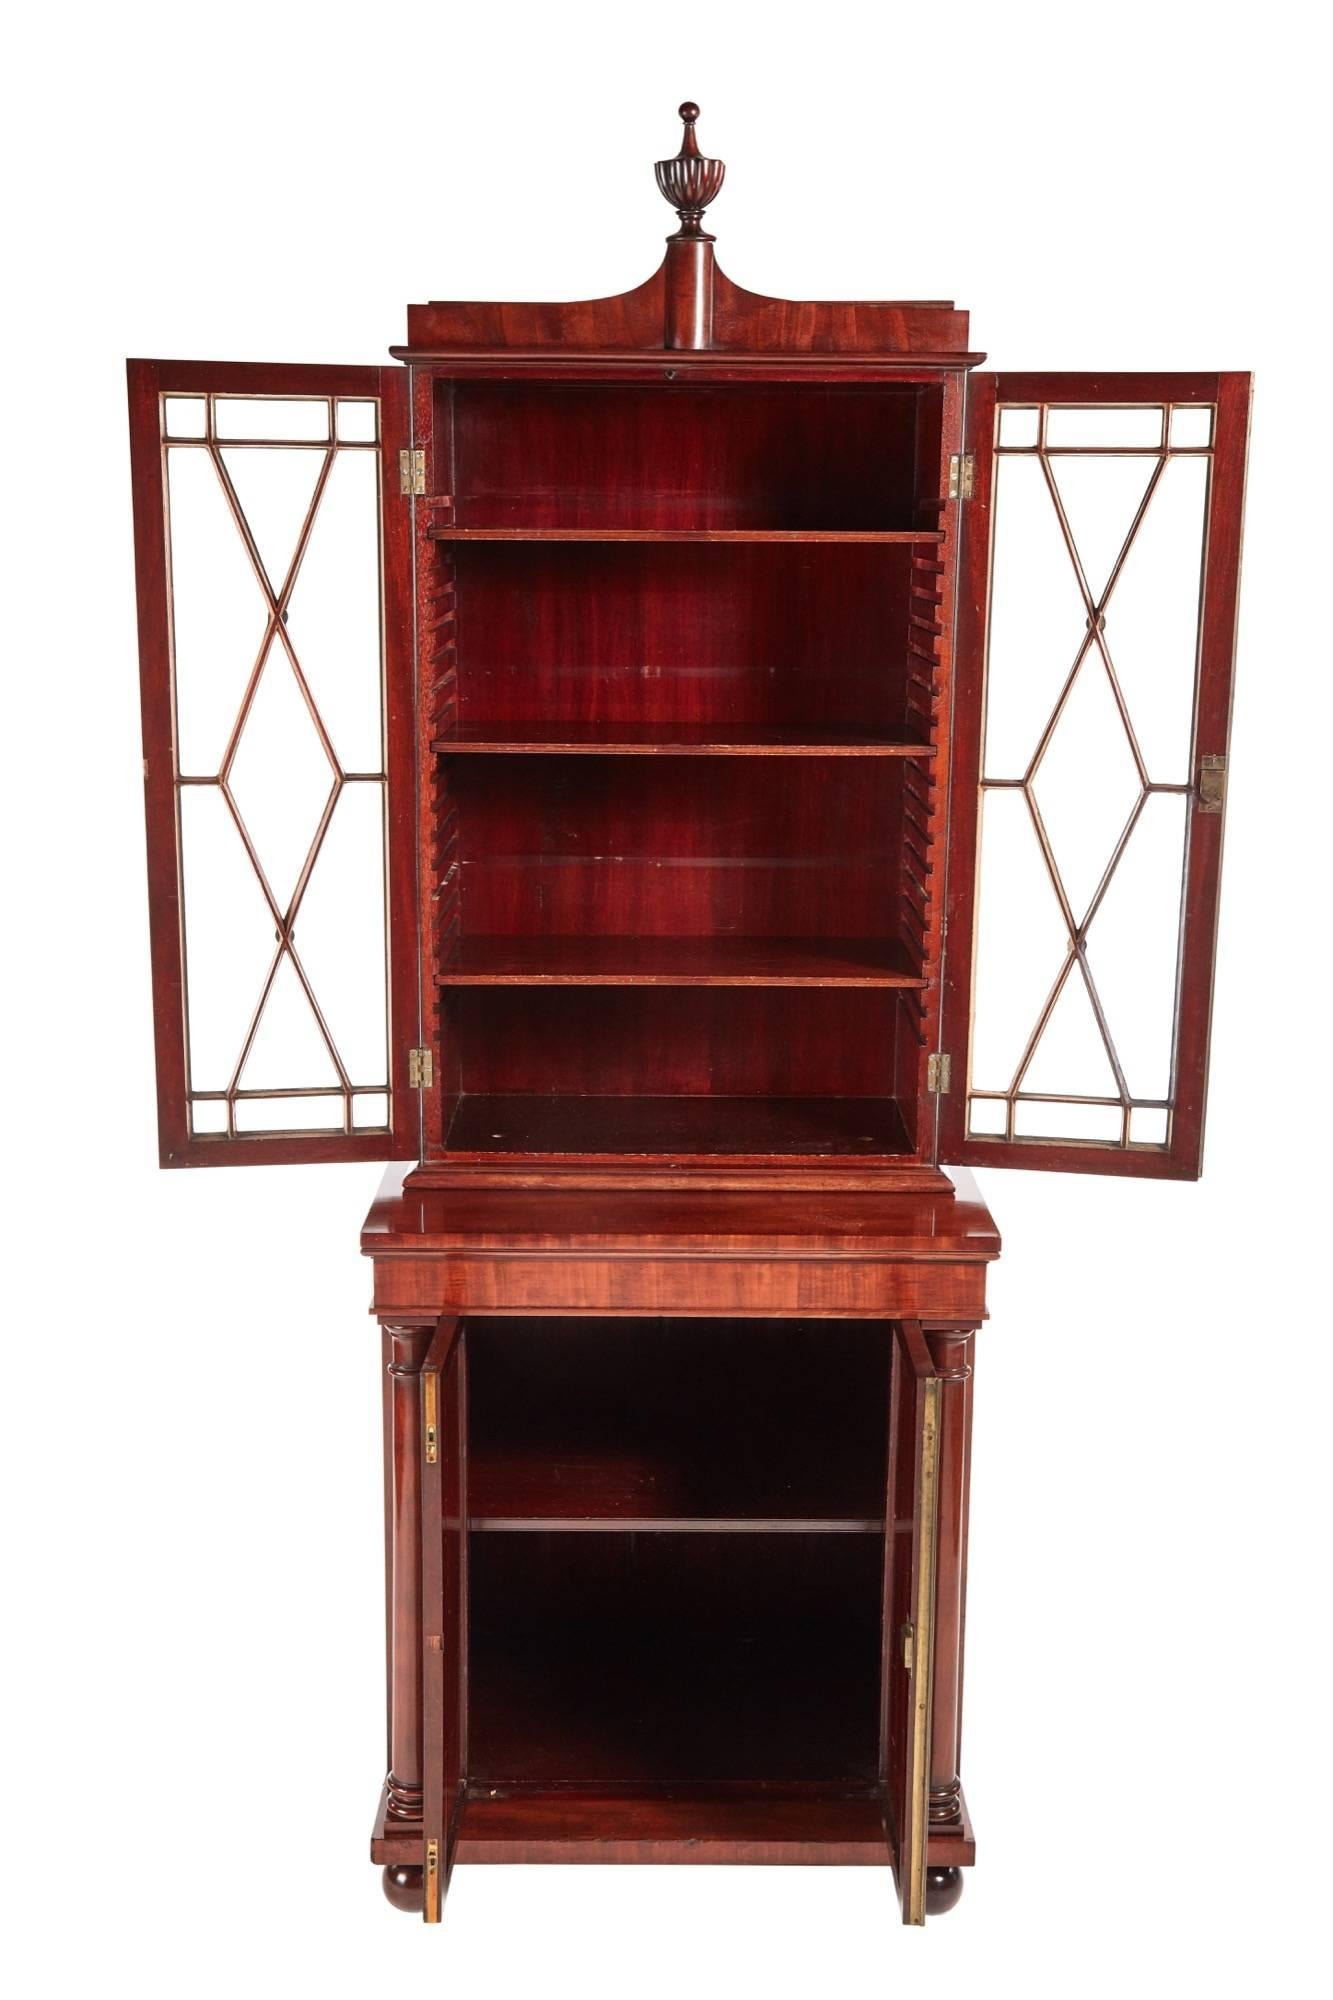 Fantastic quality William IV mahogany bookcase, the upper section with a shaped reeded urn, over a shaped cornice, pair of astragal glazed doors open to reveal an interior with adjustable shelves, the base having a mahogany top, two figures mahogany